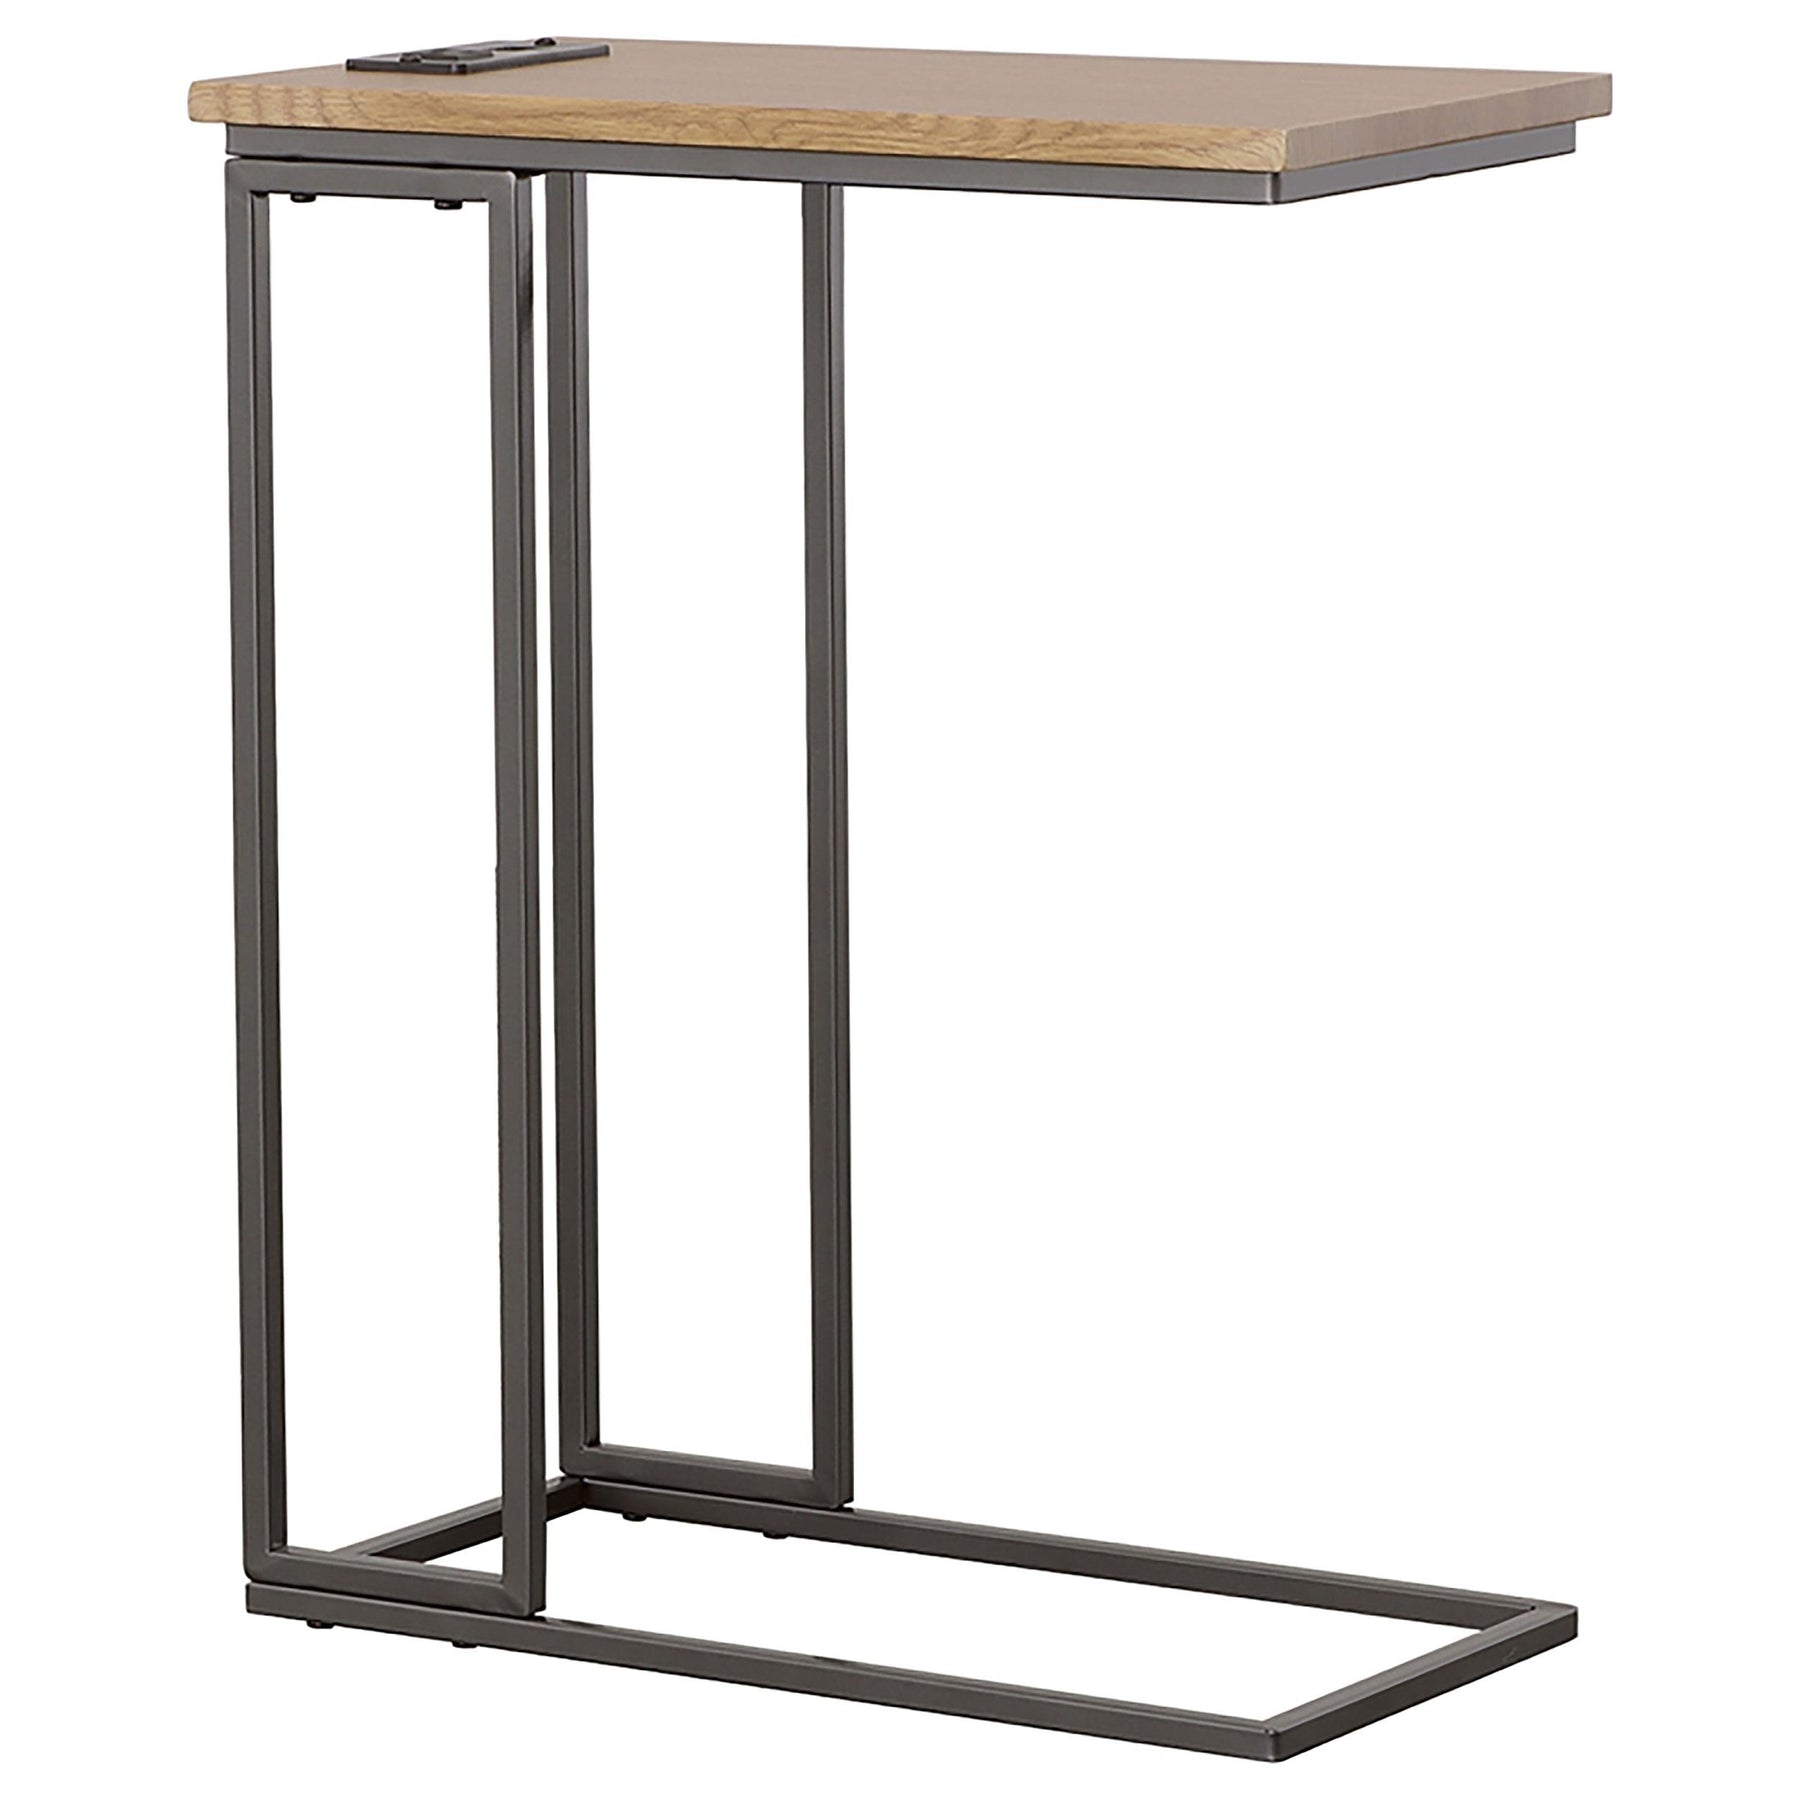 Rudy Snack Table with Power Outlet Gunmetal and Natural Rudy Snack Table with Power Outlet Gunmetal and Natural Half Price Furniture